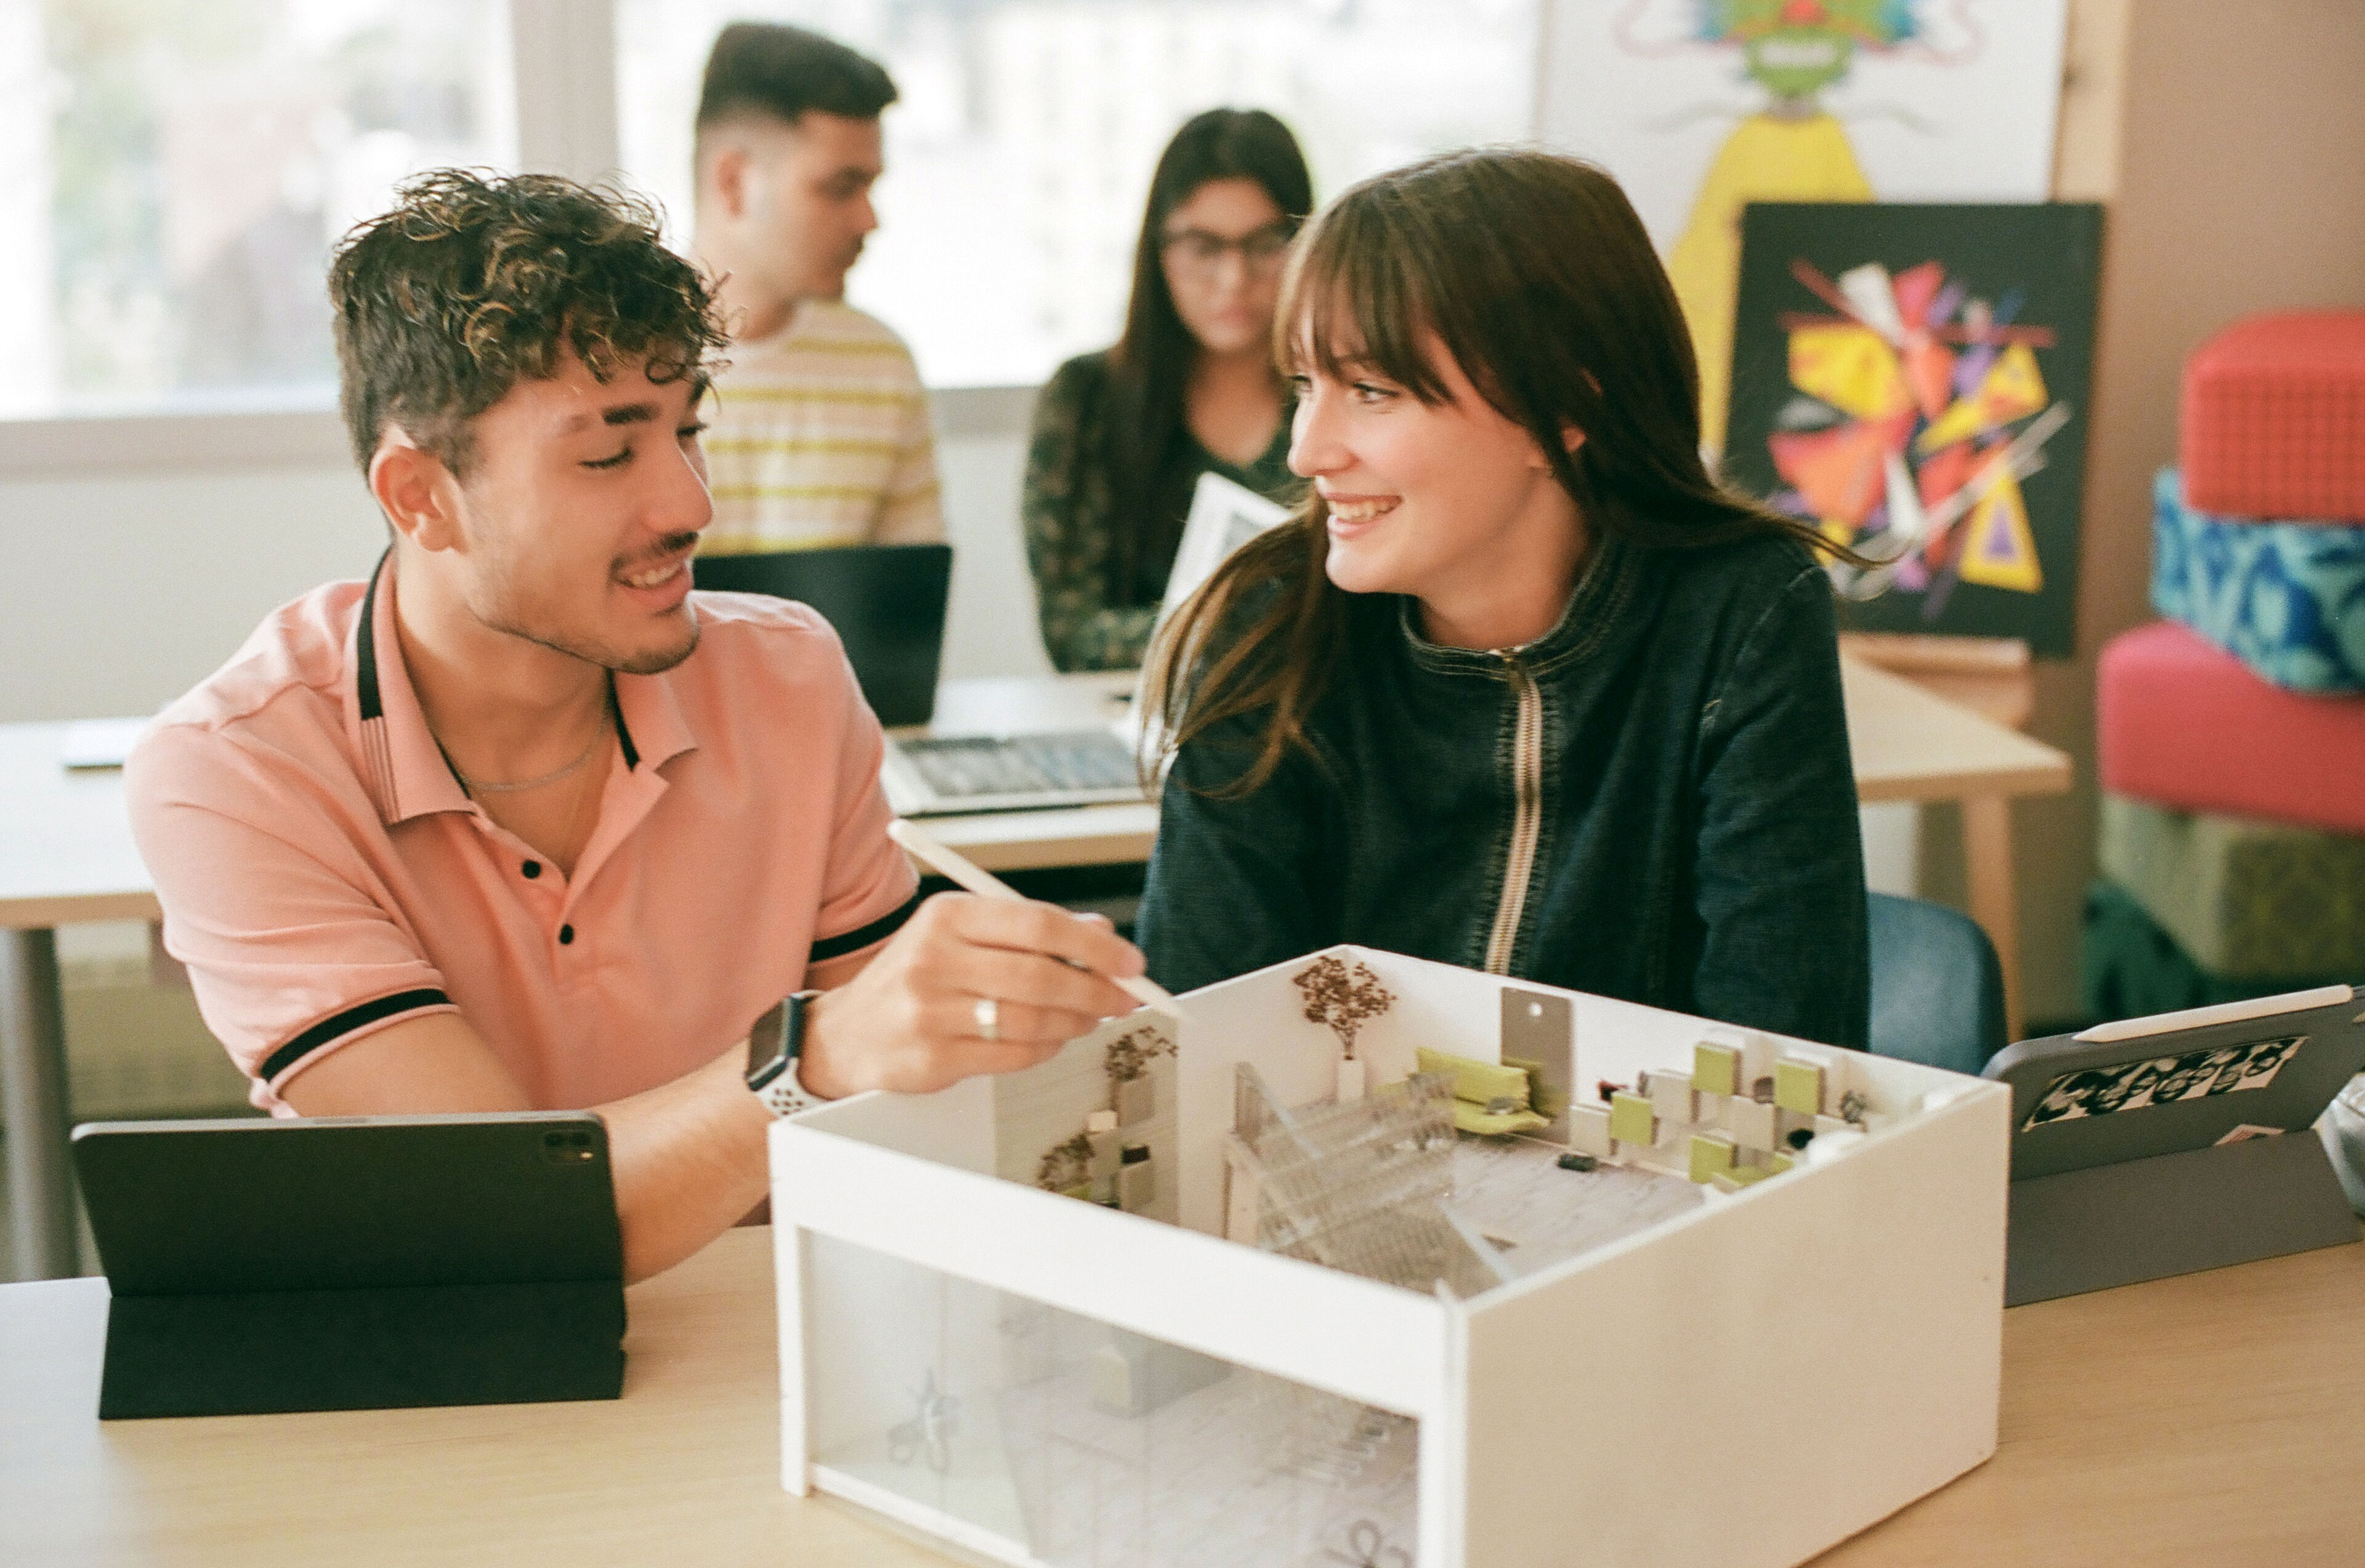 Two students laugh while examining a detailed architectural model in a classroom setting.